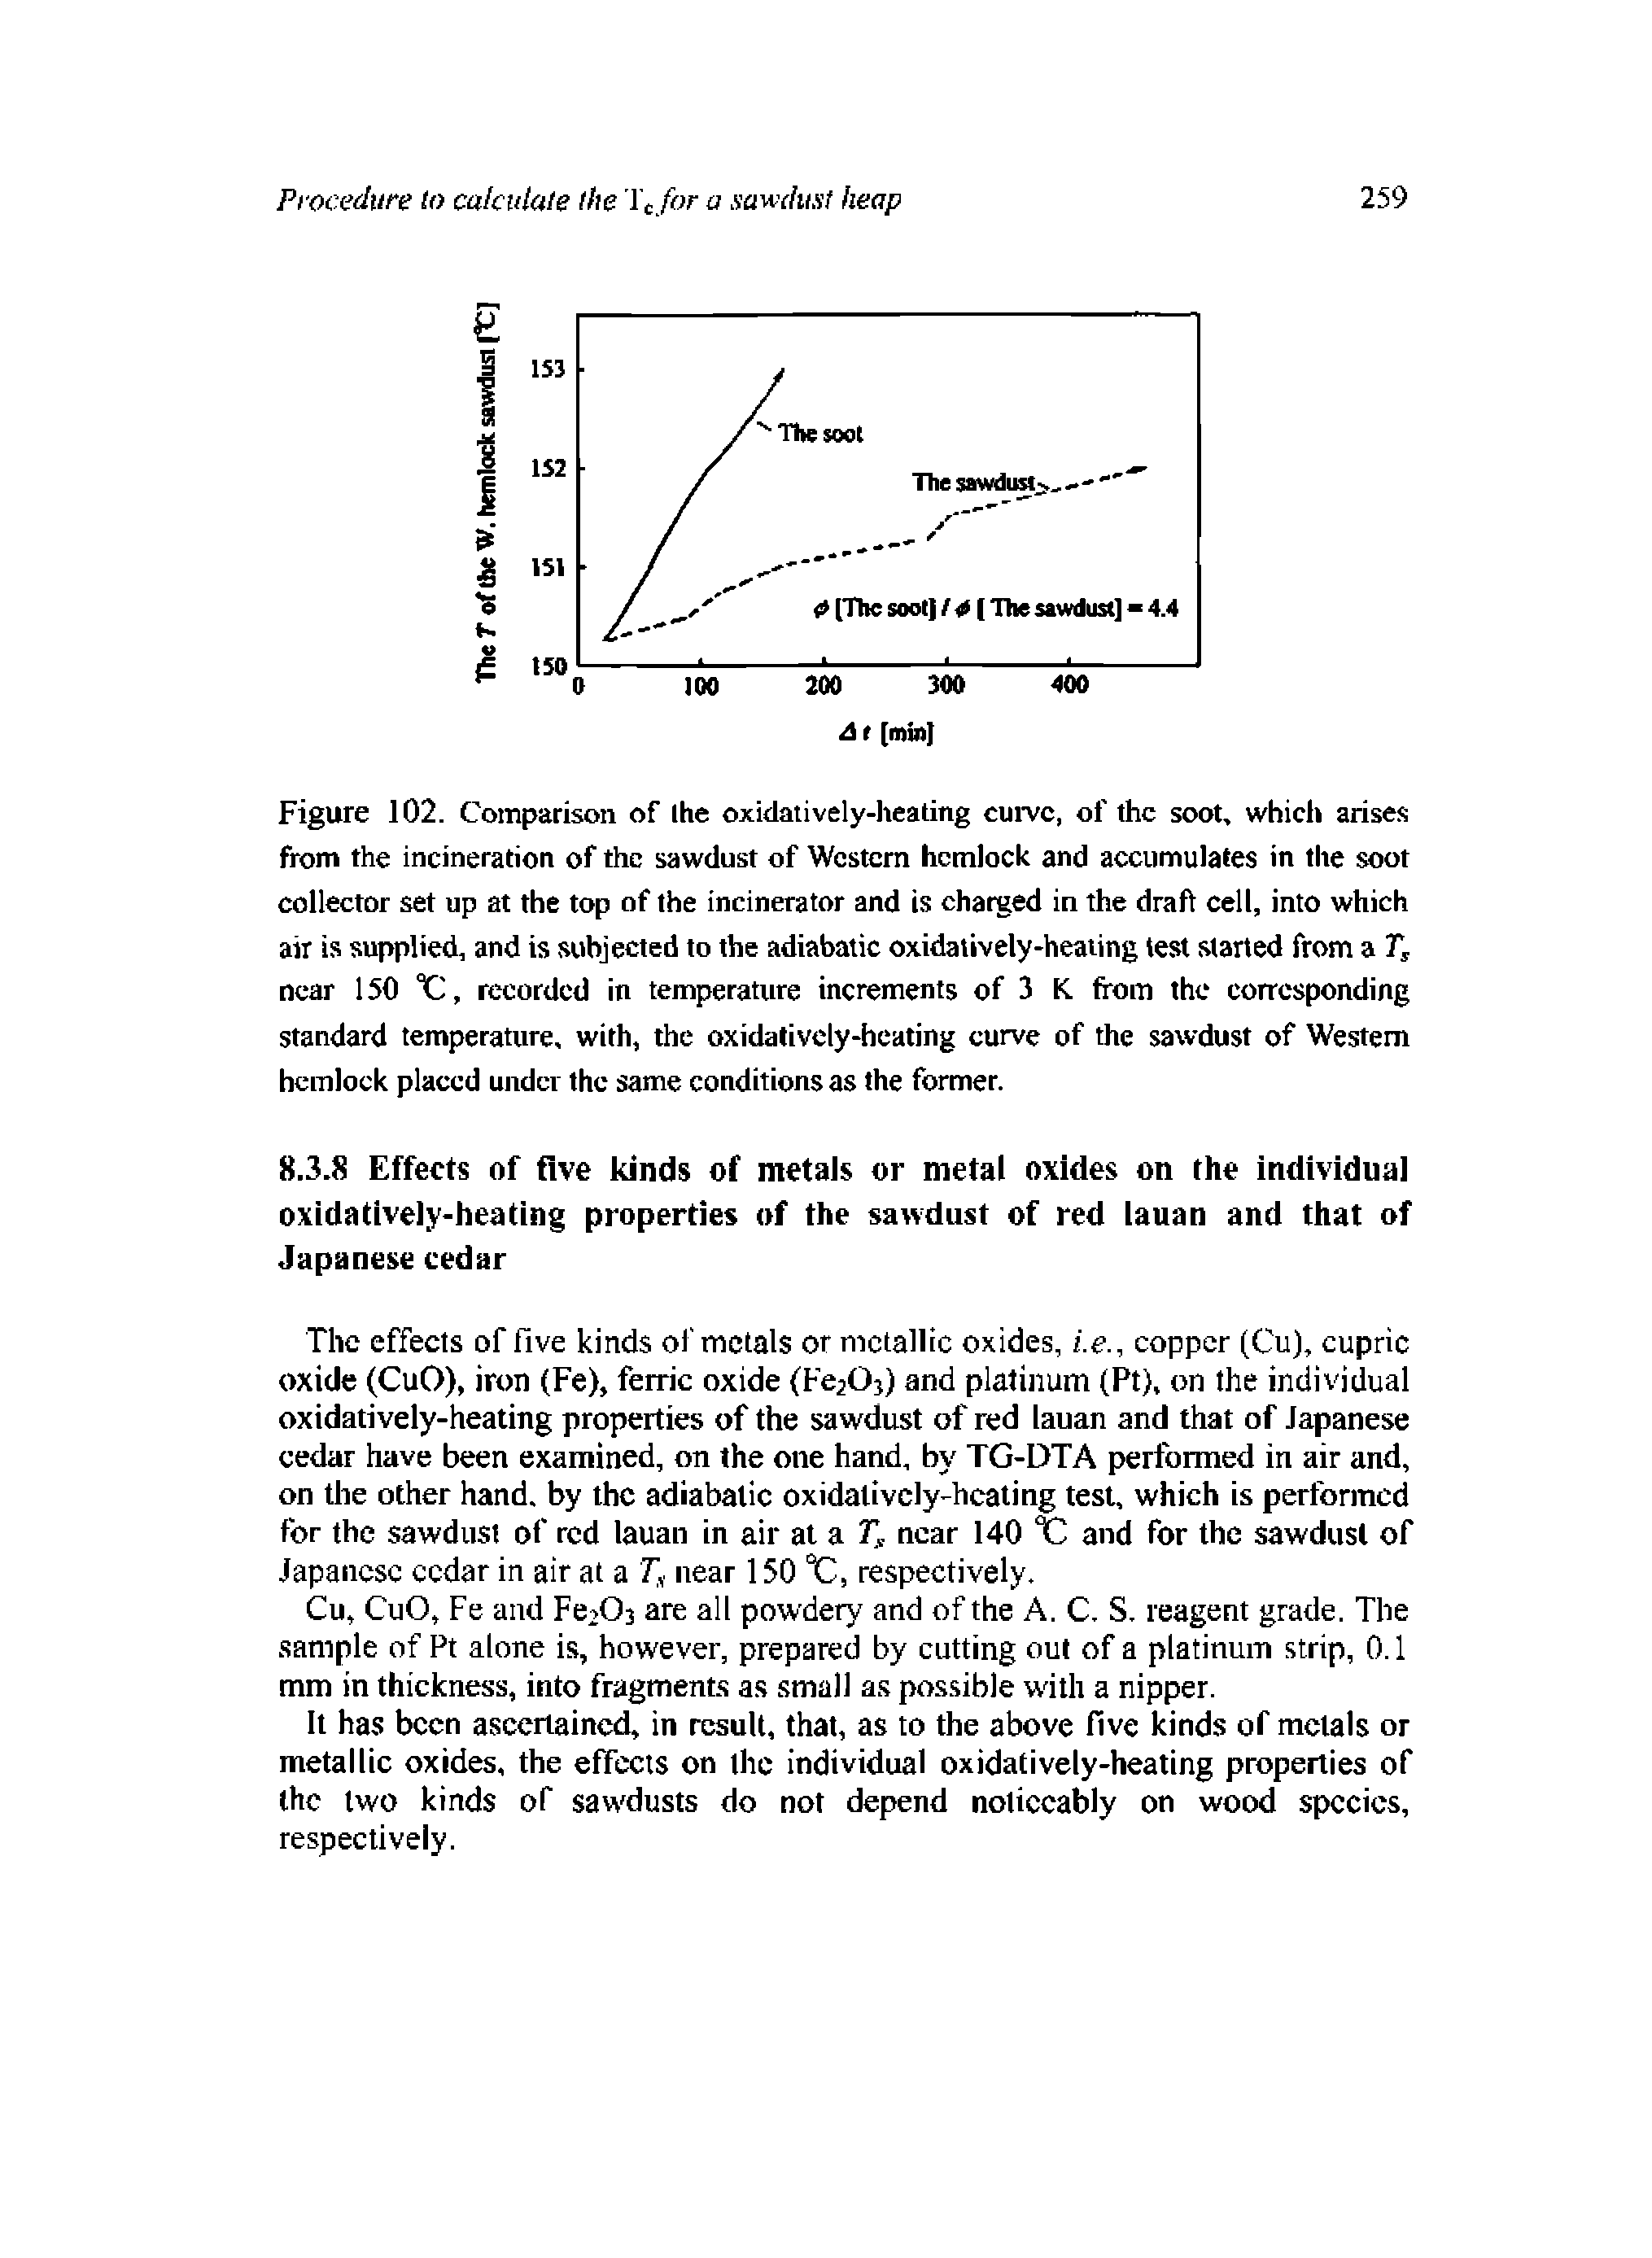 Figure 102. Comparison of Ihe oxidatively-heating curve, of the soot, which arises from the incineration of the sawdust of Western hemlock and accumulates in the soot collector set up at the top of the incinerator and is charged in the draft cell, into which air is supplied, and is subjected to the adiabatic oxidatively-heating test started from a near 150 C, recorded in temperature increments of 3 K from the corresponding standard temperature, with, the oxidatively-heating curve of the sawdust of Western hemlock placed under the same conditions as the former.